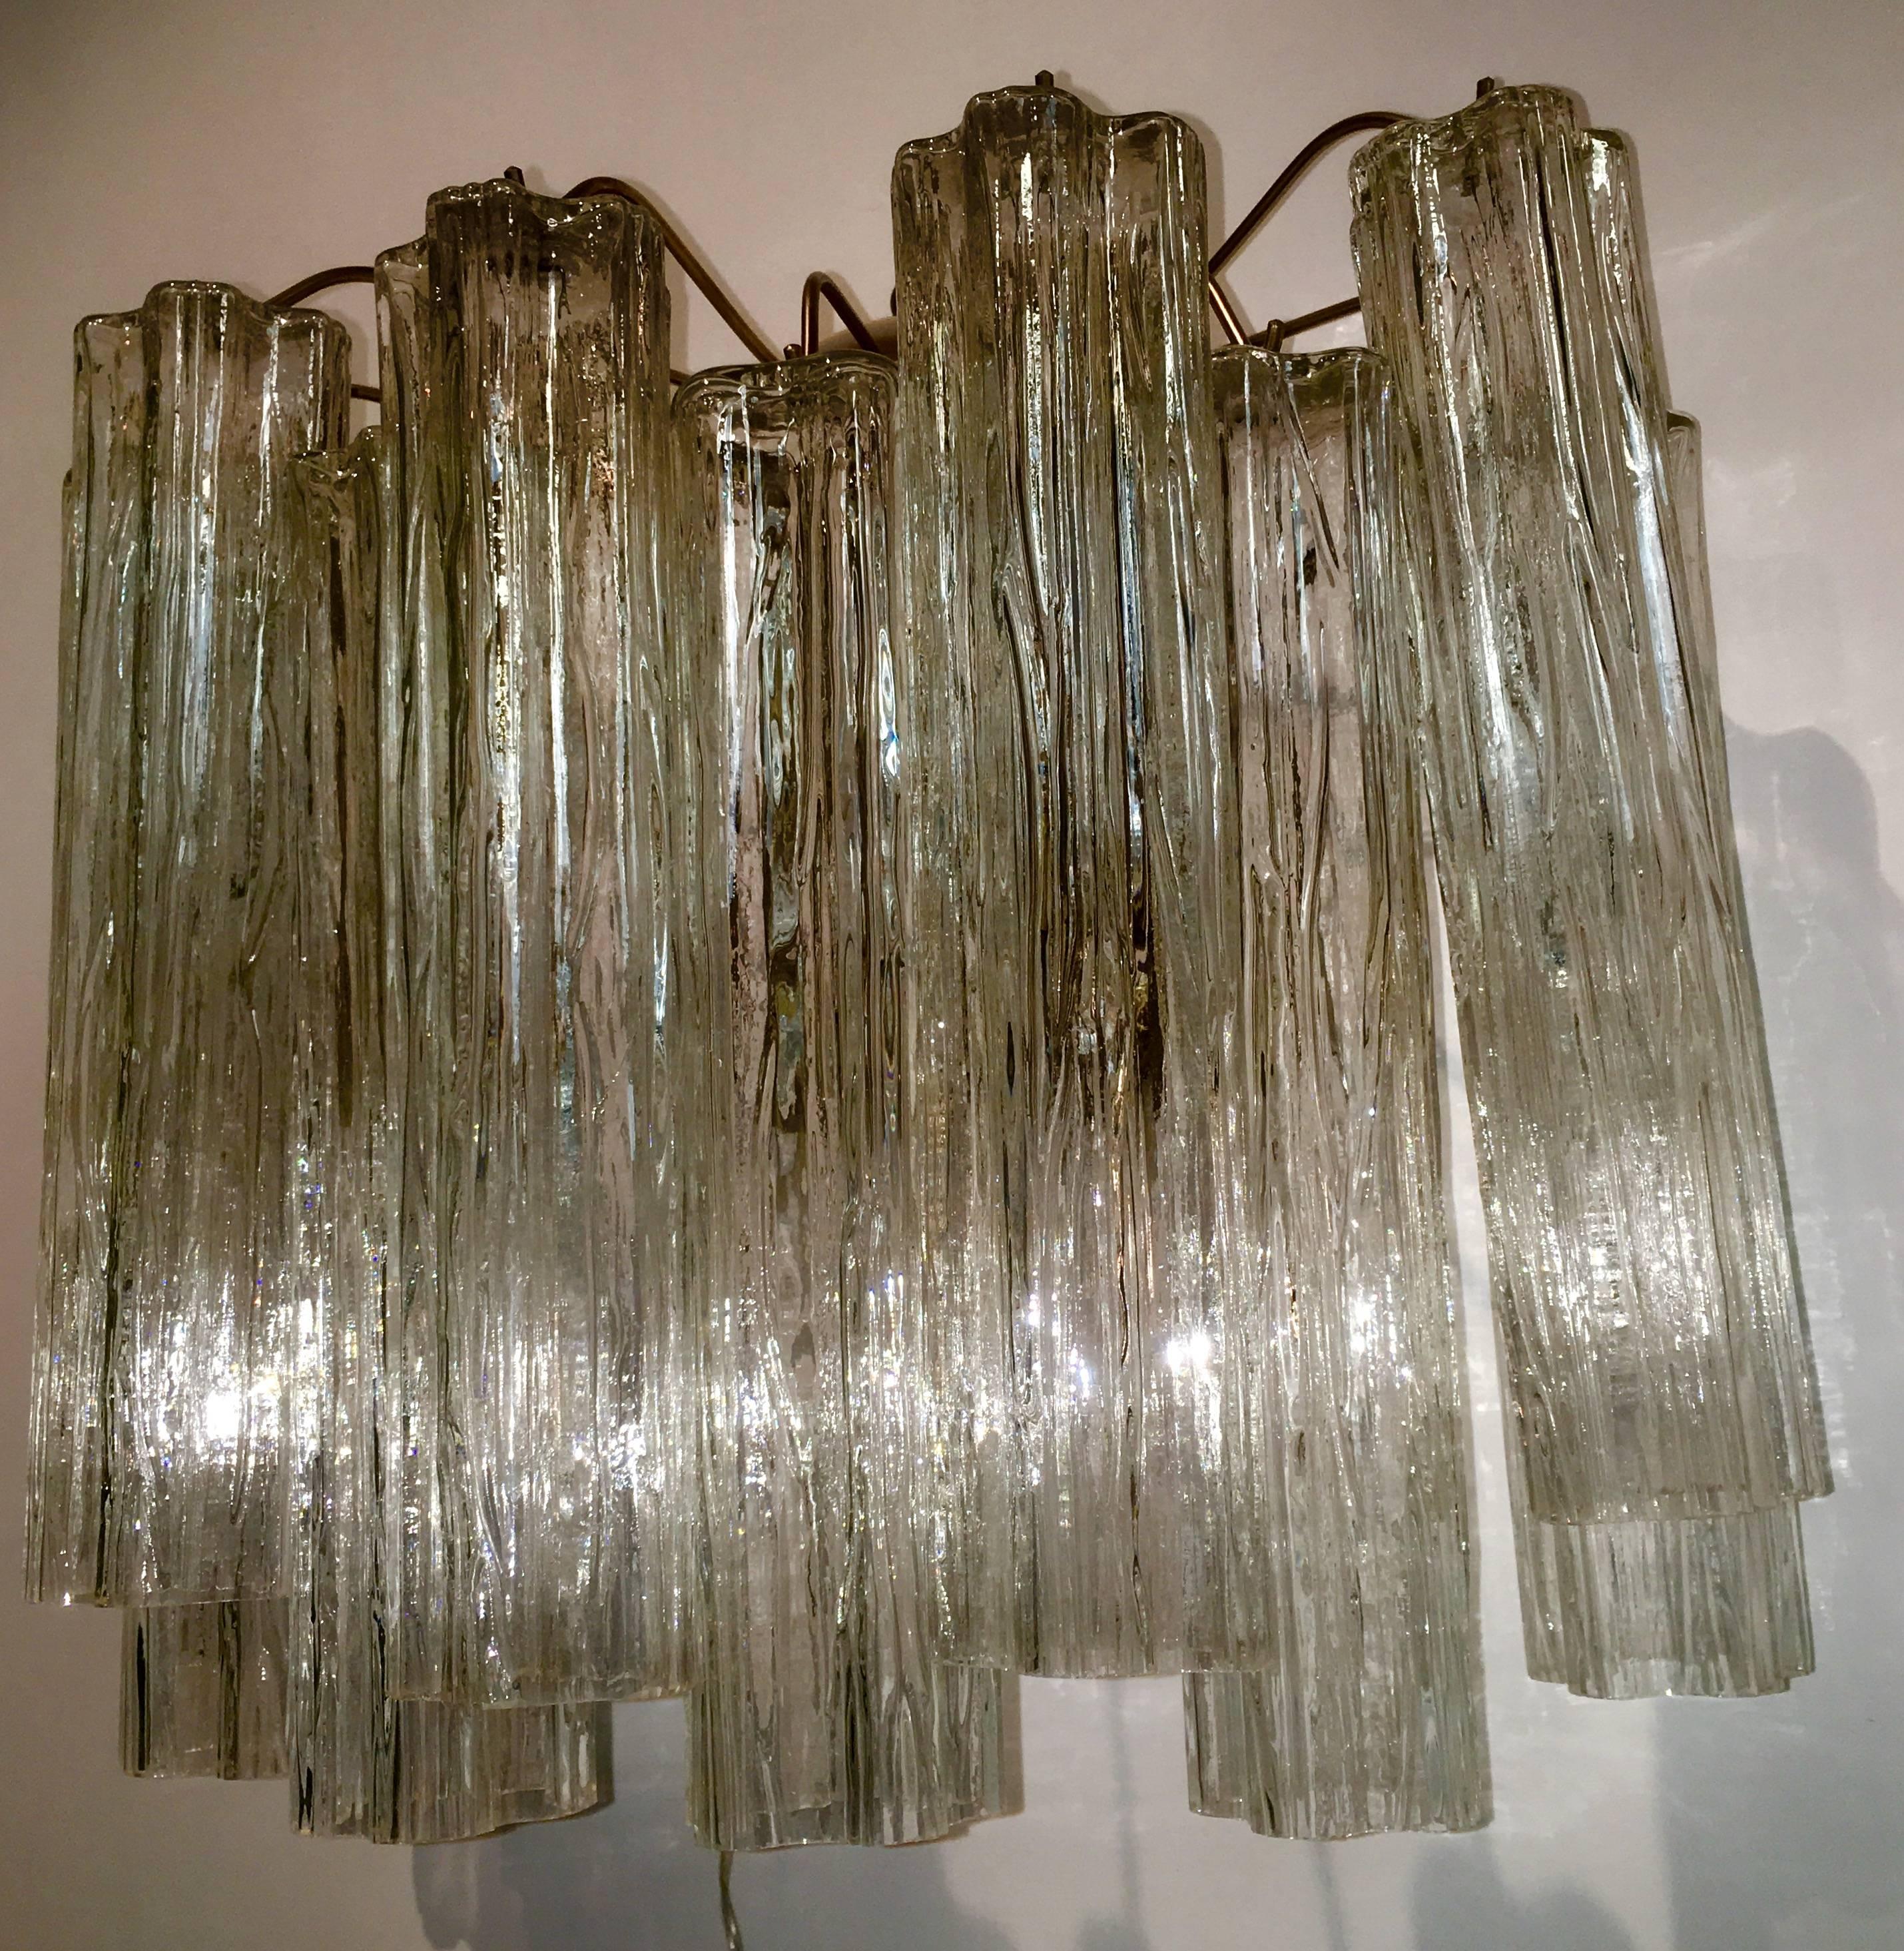 20th Century Pair of Venini Tronchi Sconces or Wall Lights by Toni Zuccheri, 1970s For Sale